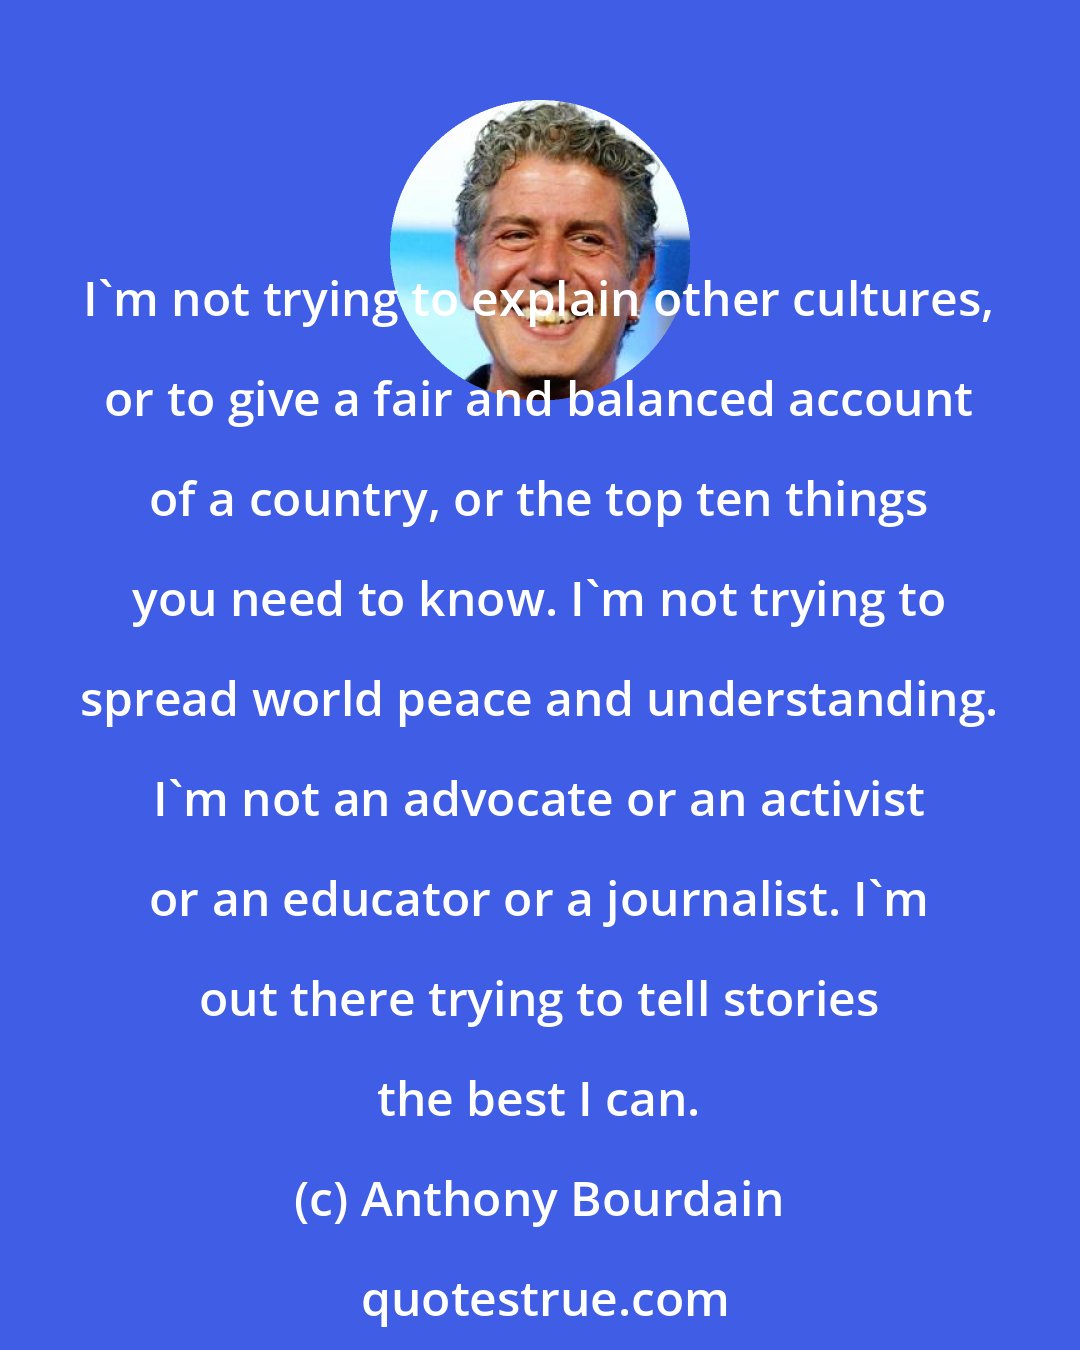 Anthony Bourdain: I'm not trying to explain other cultures, or to give a fair and balanced account of a country, or the top ten things you need to know. I'm not trying to spread world peace and understanding. I'm not an advocate or an activist or an educator or a journalist. I'm out there trying to tell stories the best I can.